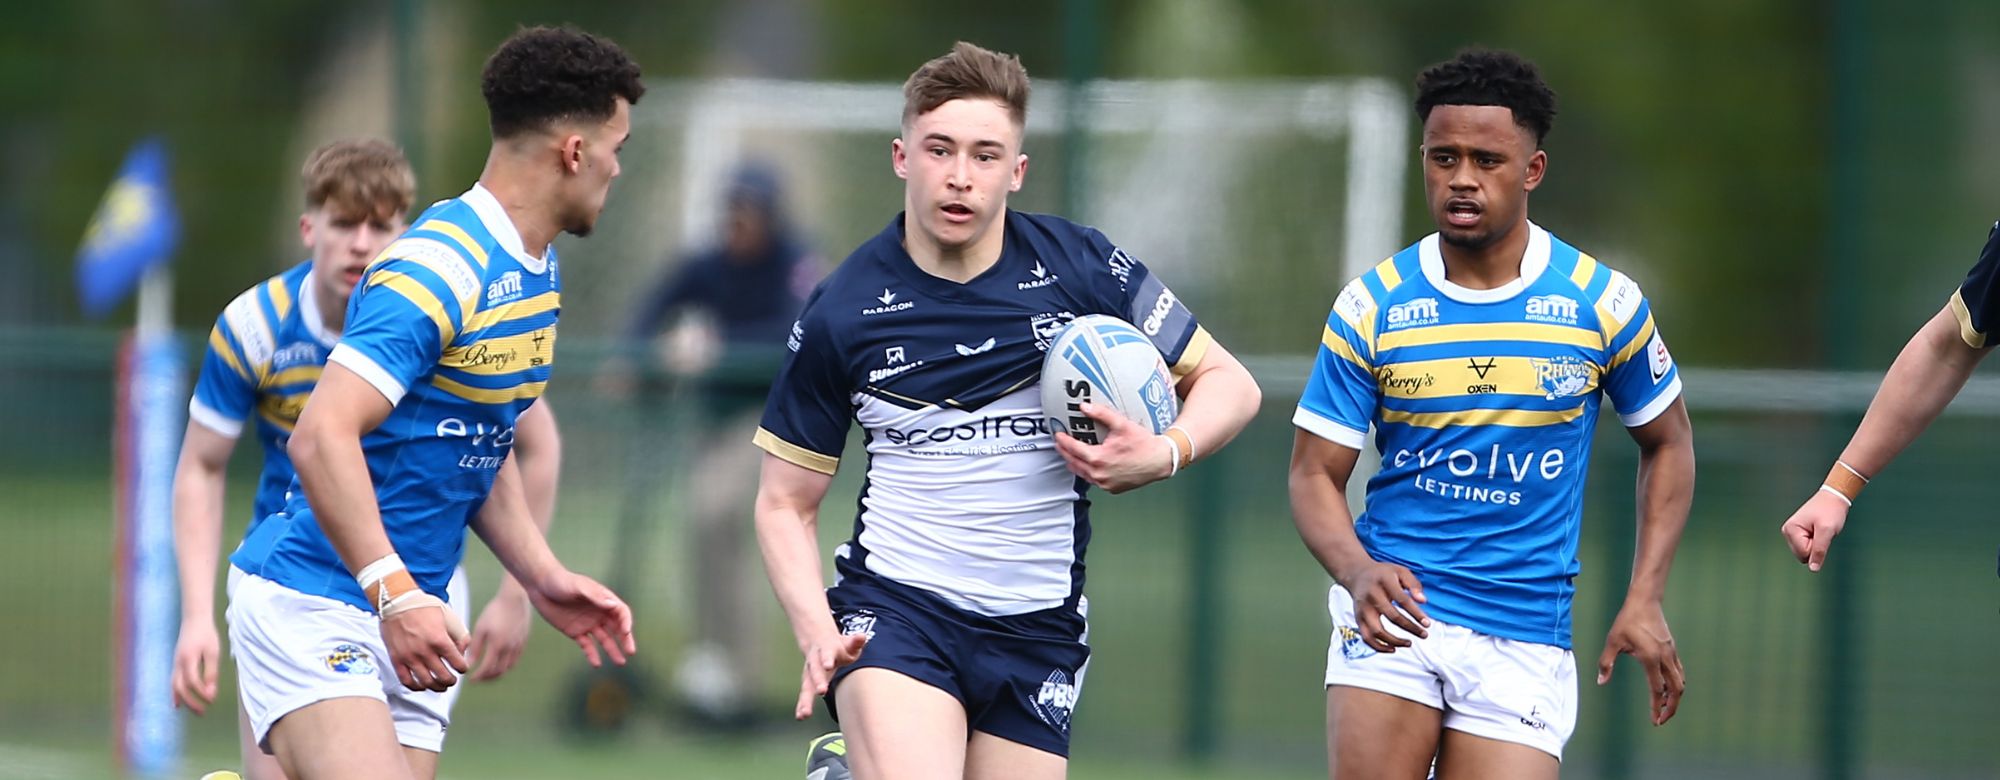 Academy Suffer Defeat To Rhinos